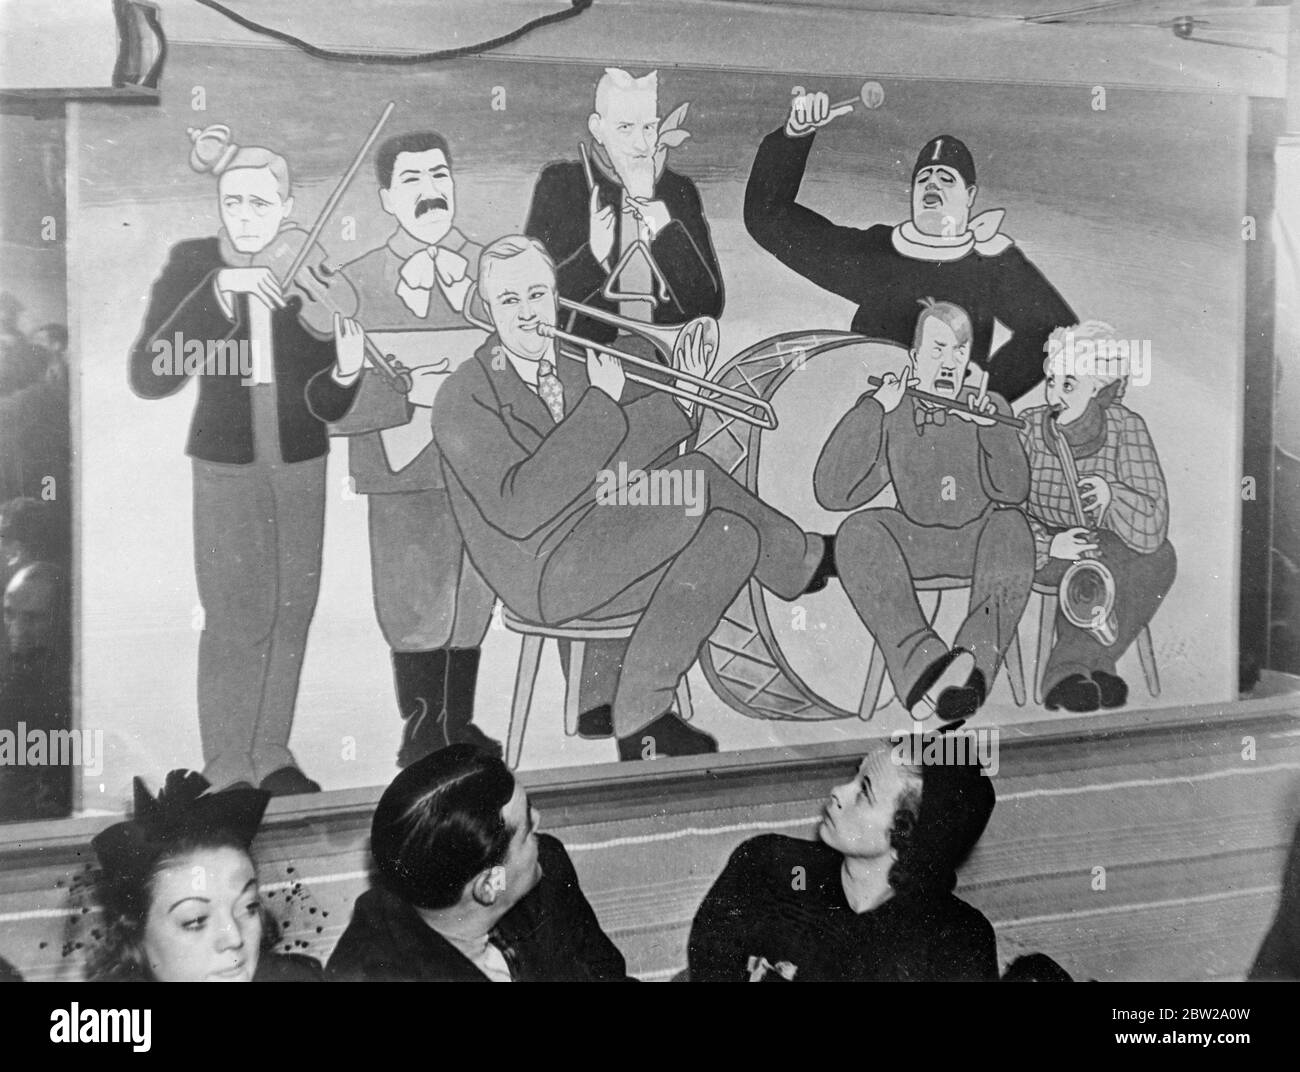 Duke of Windsor and president Roosevelt in 'swing band' the world's great cartoons at New York nightclub. When the 'Famous Door', a New York night club, reopened for the winter season, visitors were greeted by a mural of a swing band, the 'players' in which bore striking resemblance world-famous characters, including the Duke of Windsor and president Roosevelt. Photo shows, the 'swing band' mural at the Famous Door Club , depicting, left to right (behind) . The Duke of Windsor, Stalin, Bernard Shaw and Mussolini, beating the drum, in front. Left-to-right are president Roosevelt, Hitler and Pro Stock Photo